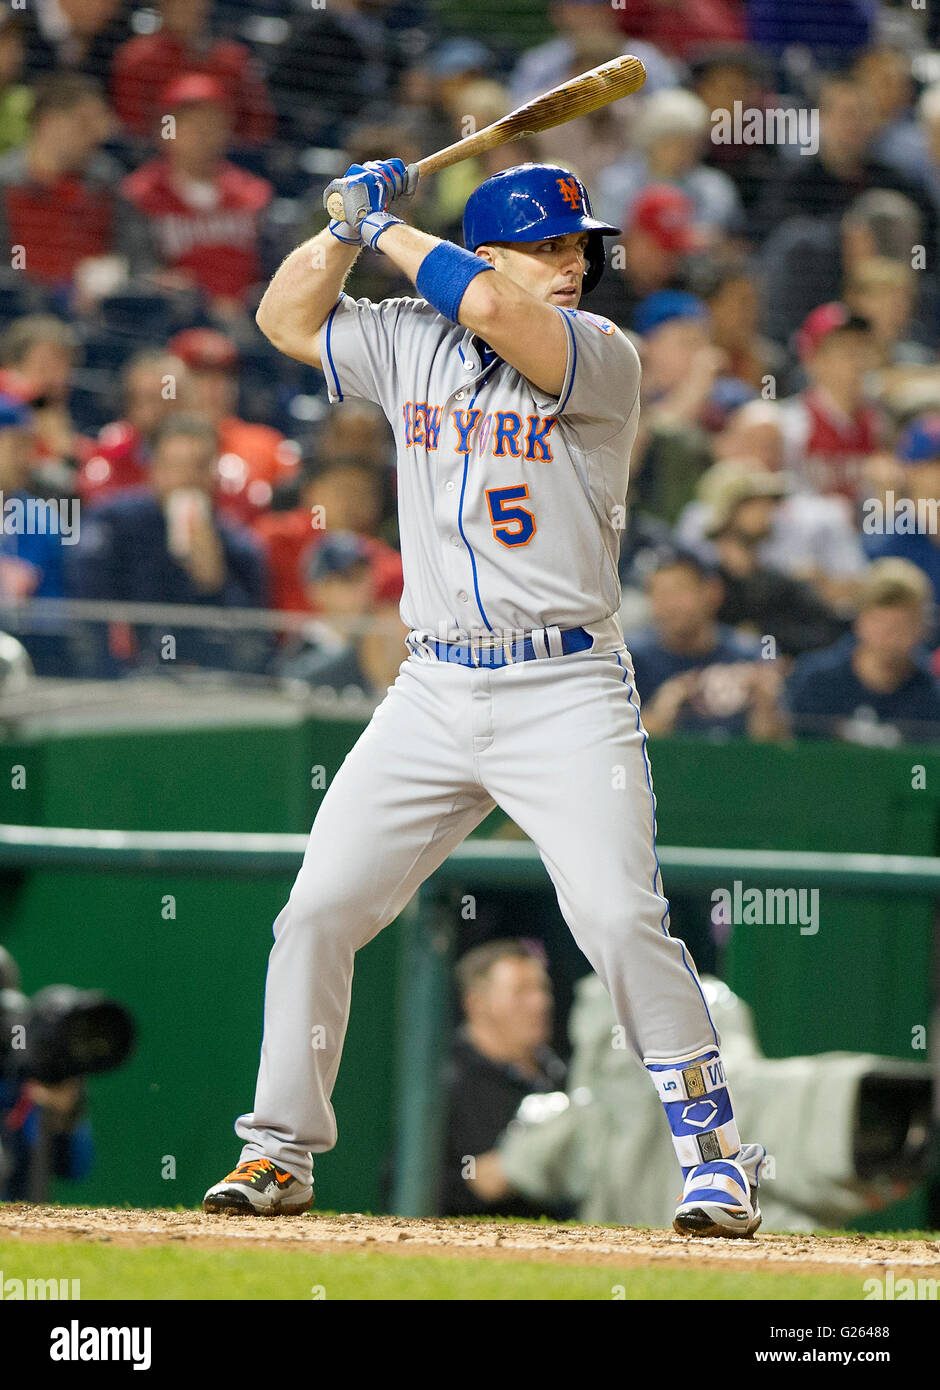 920 David Wright Mets Home Run Photos & High Res Pictures - Getty